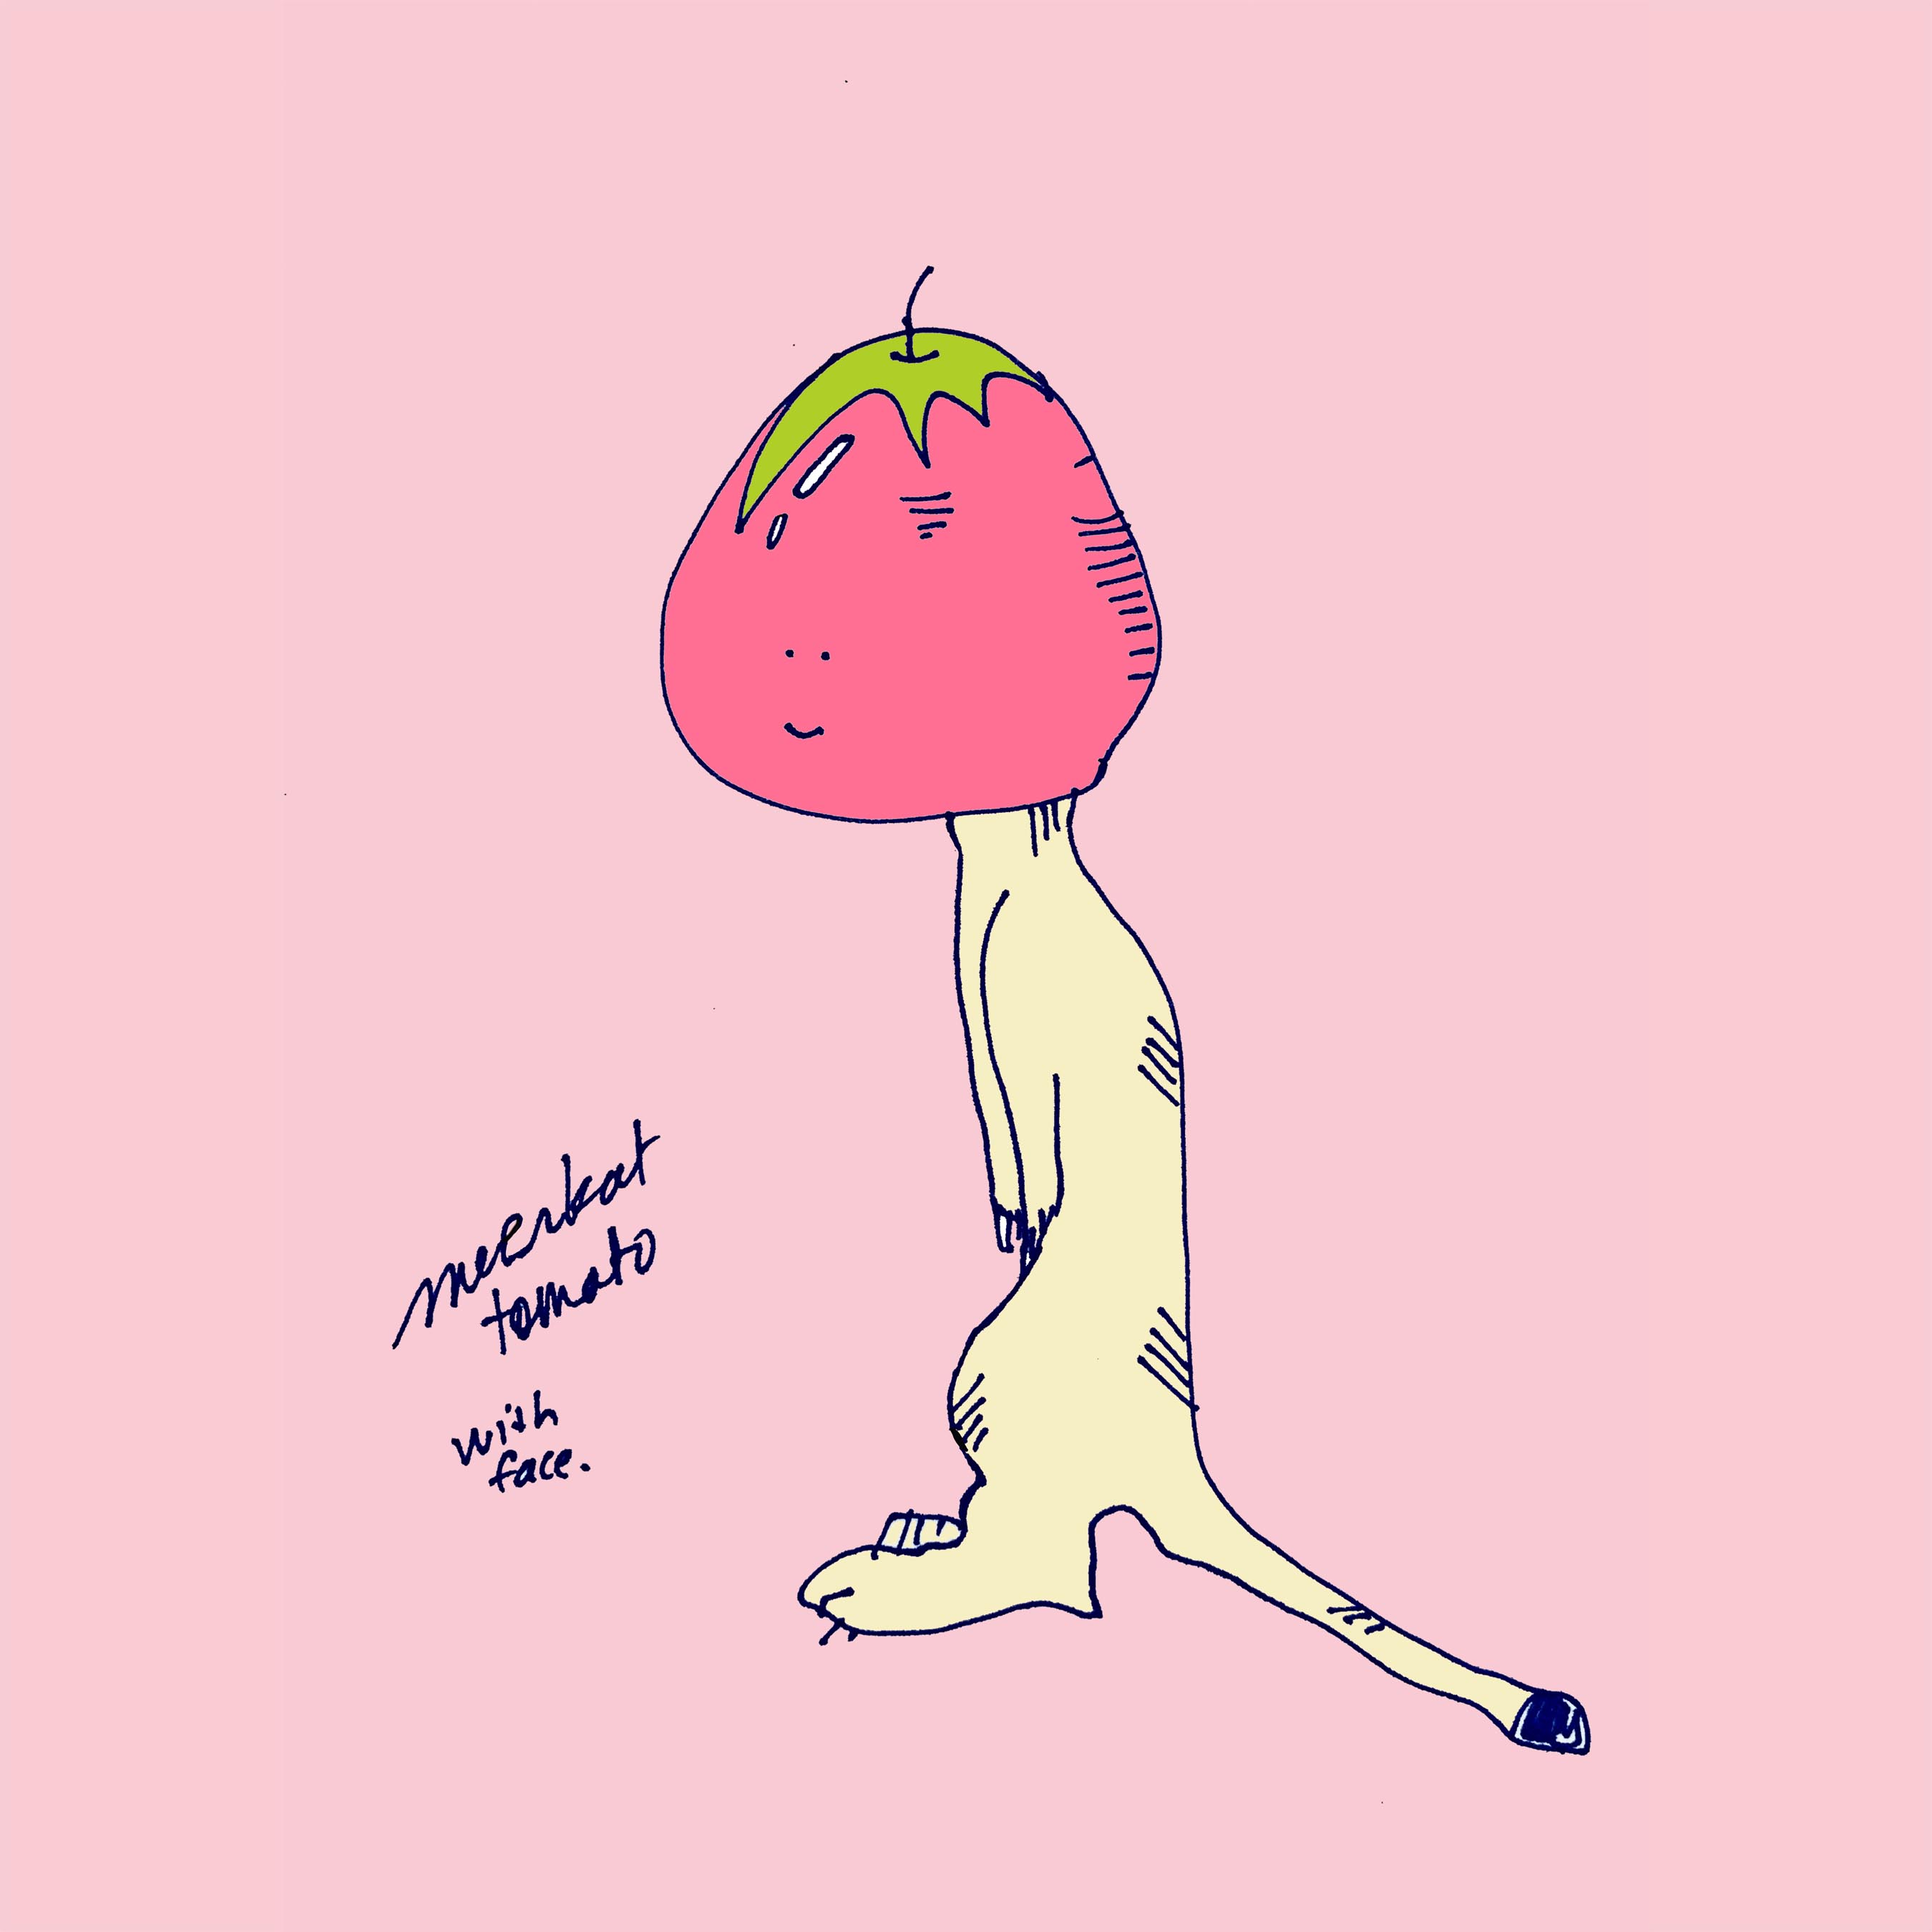 ART EVERY DAY NUMBER 616 / ILLUSTRATION / MEERKAT STRAWBERRY TOMATO